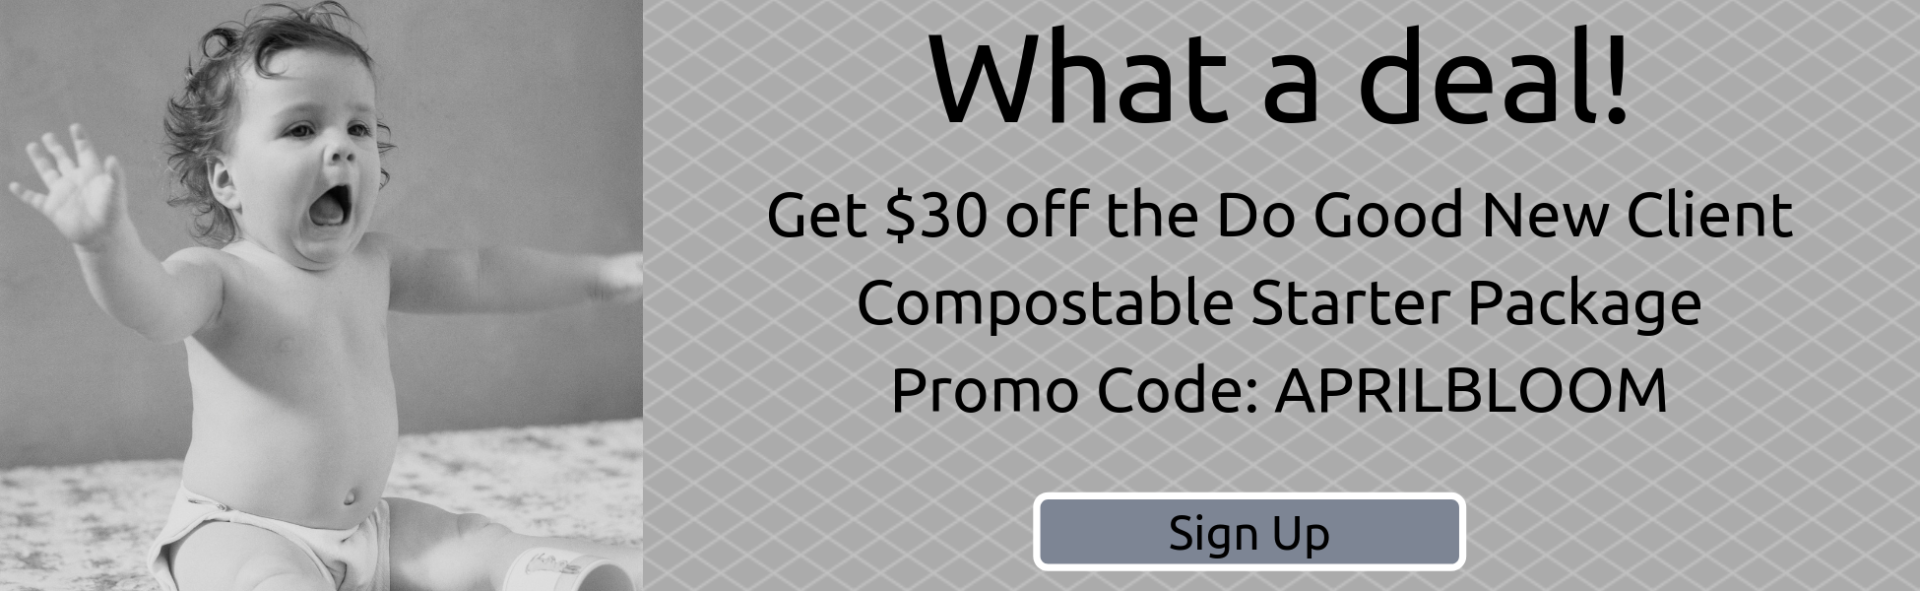 Get $30 off Do Good New Client Compostable Starter Package